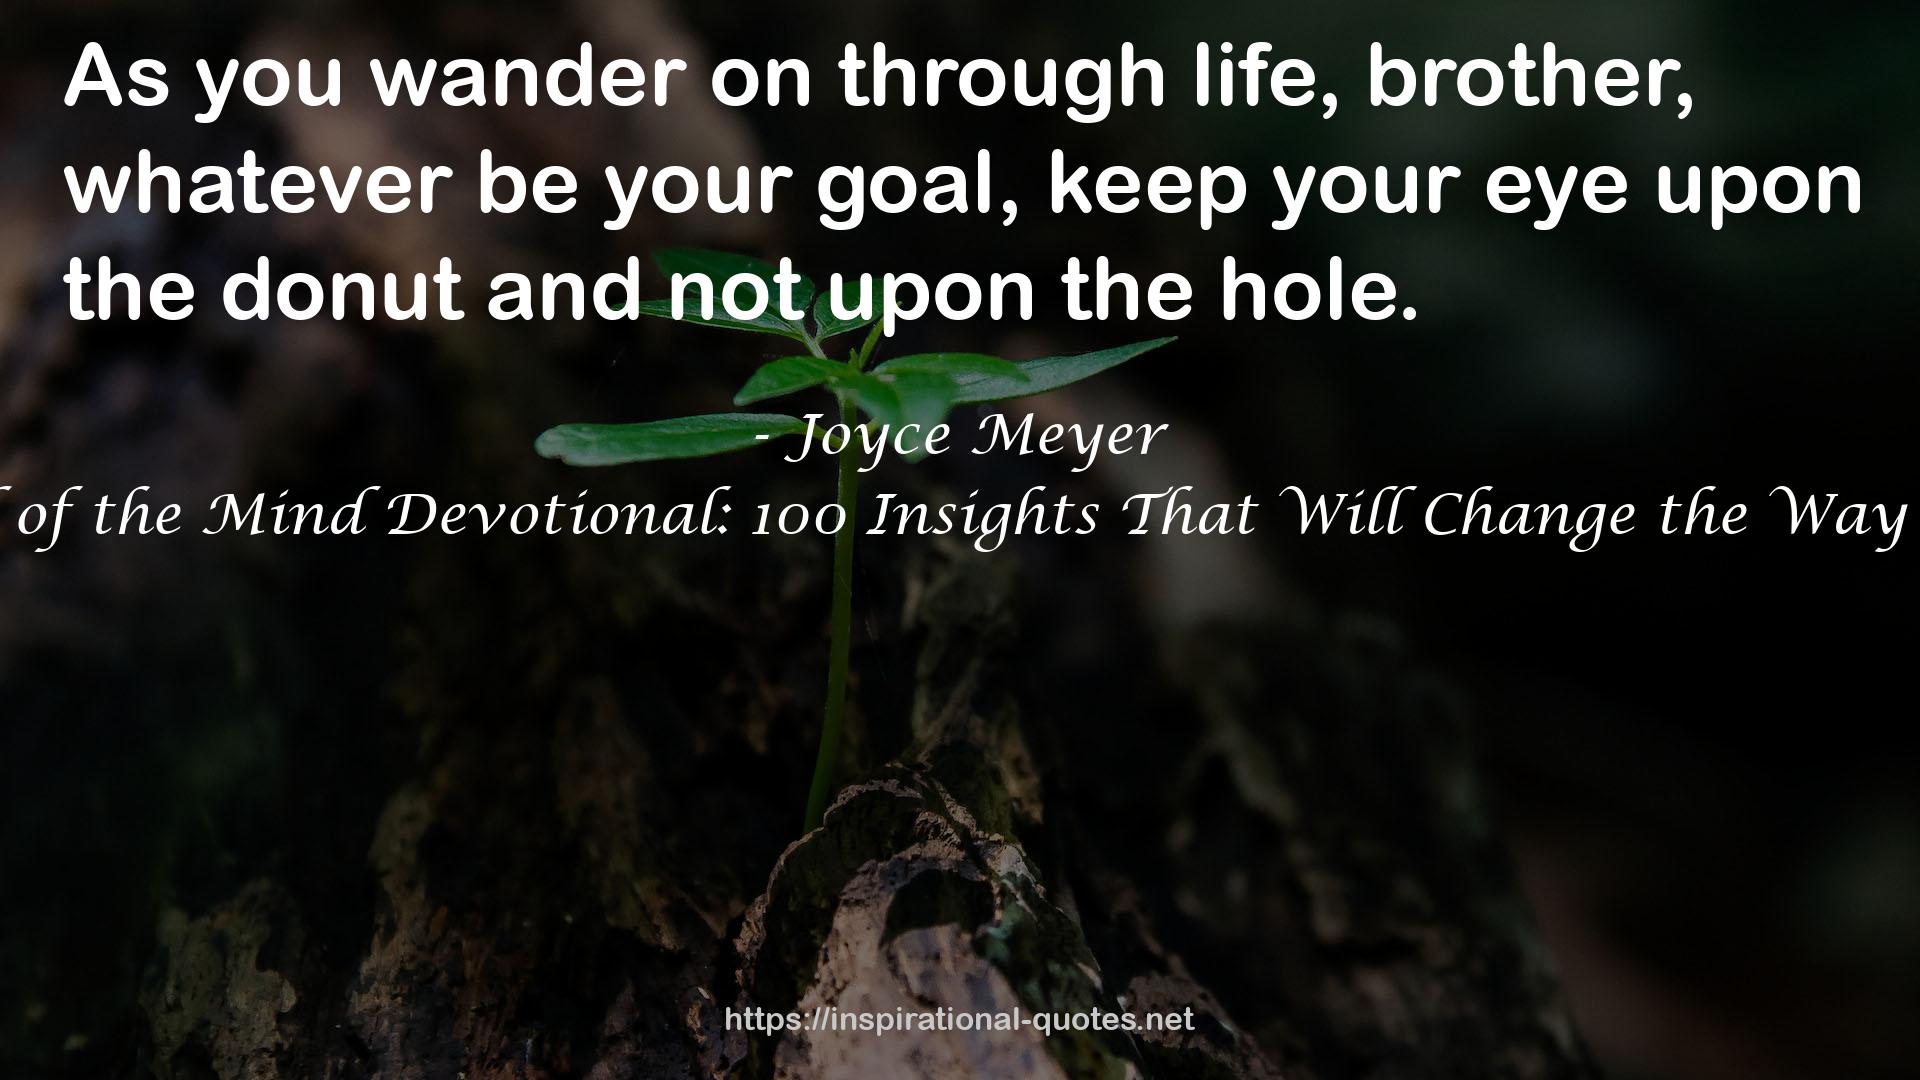 Battlefield of the Mind Devotional: 100 Insights That Will Change the Way You Think QUOTES